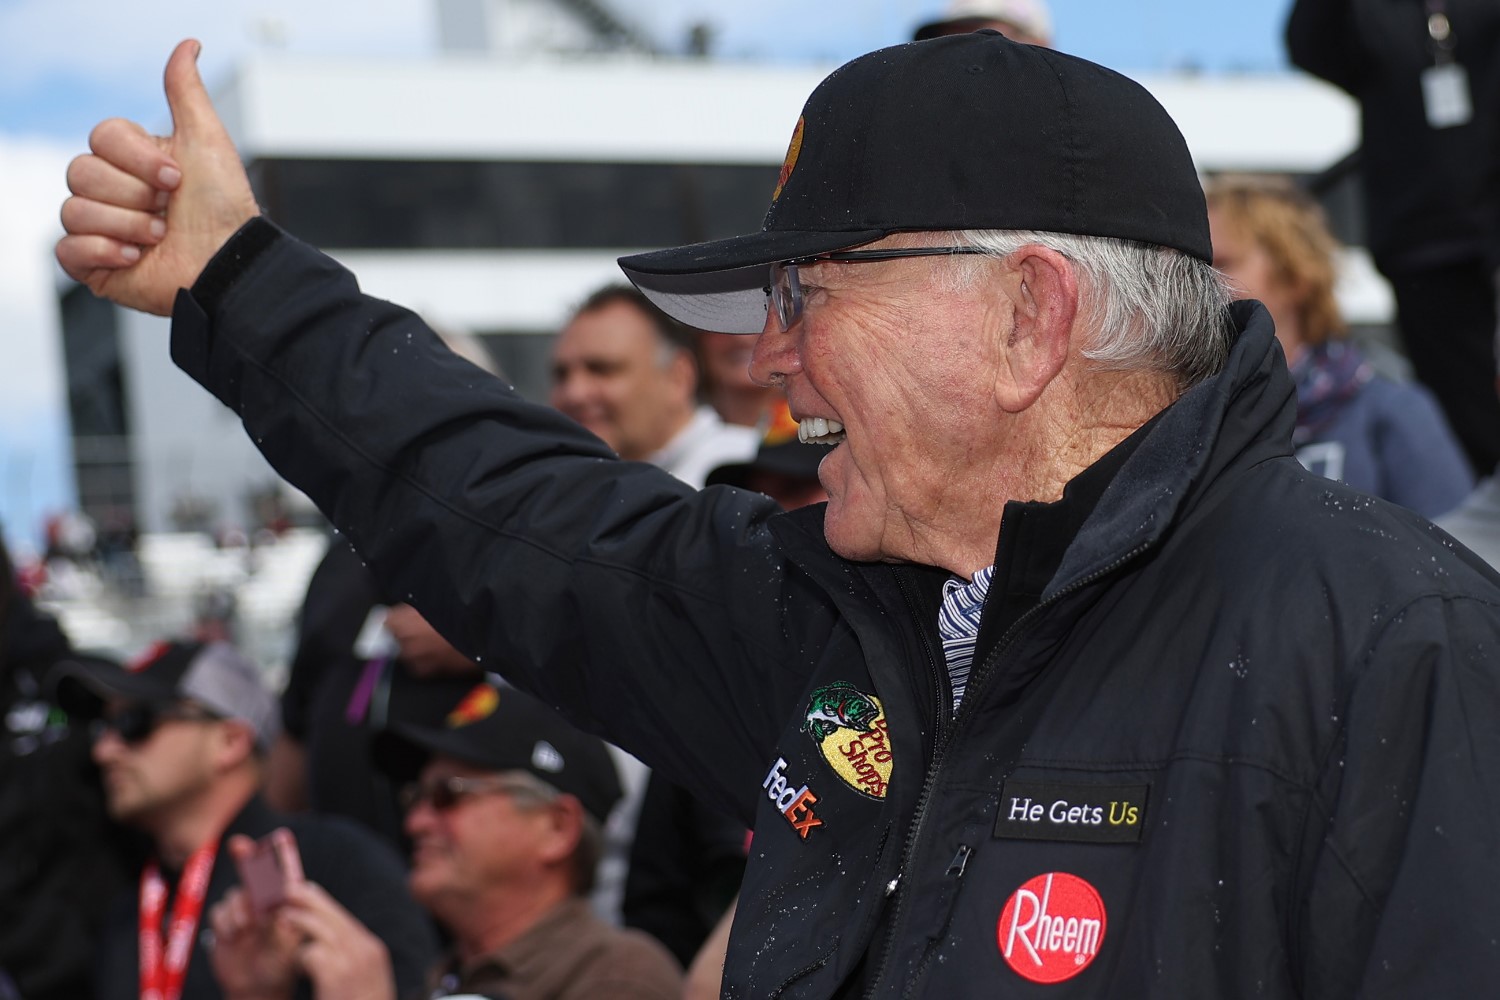 JGR team owner and Hall of Famer, Joe Gibbs gives a thumbs up to Martin Truex Jr., driver of the #19 Bass Pro Shops Toyota, (not pictured) in victory lane after winning the NASCAR Cup Series Würth 400 at Dover International Speedway on May 01, 2023 in Dover, Delaware. (Photo by James Gilbert/Getty Images)